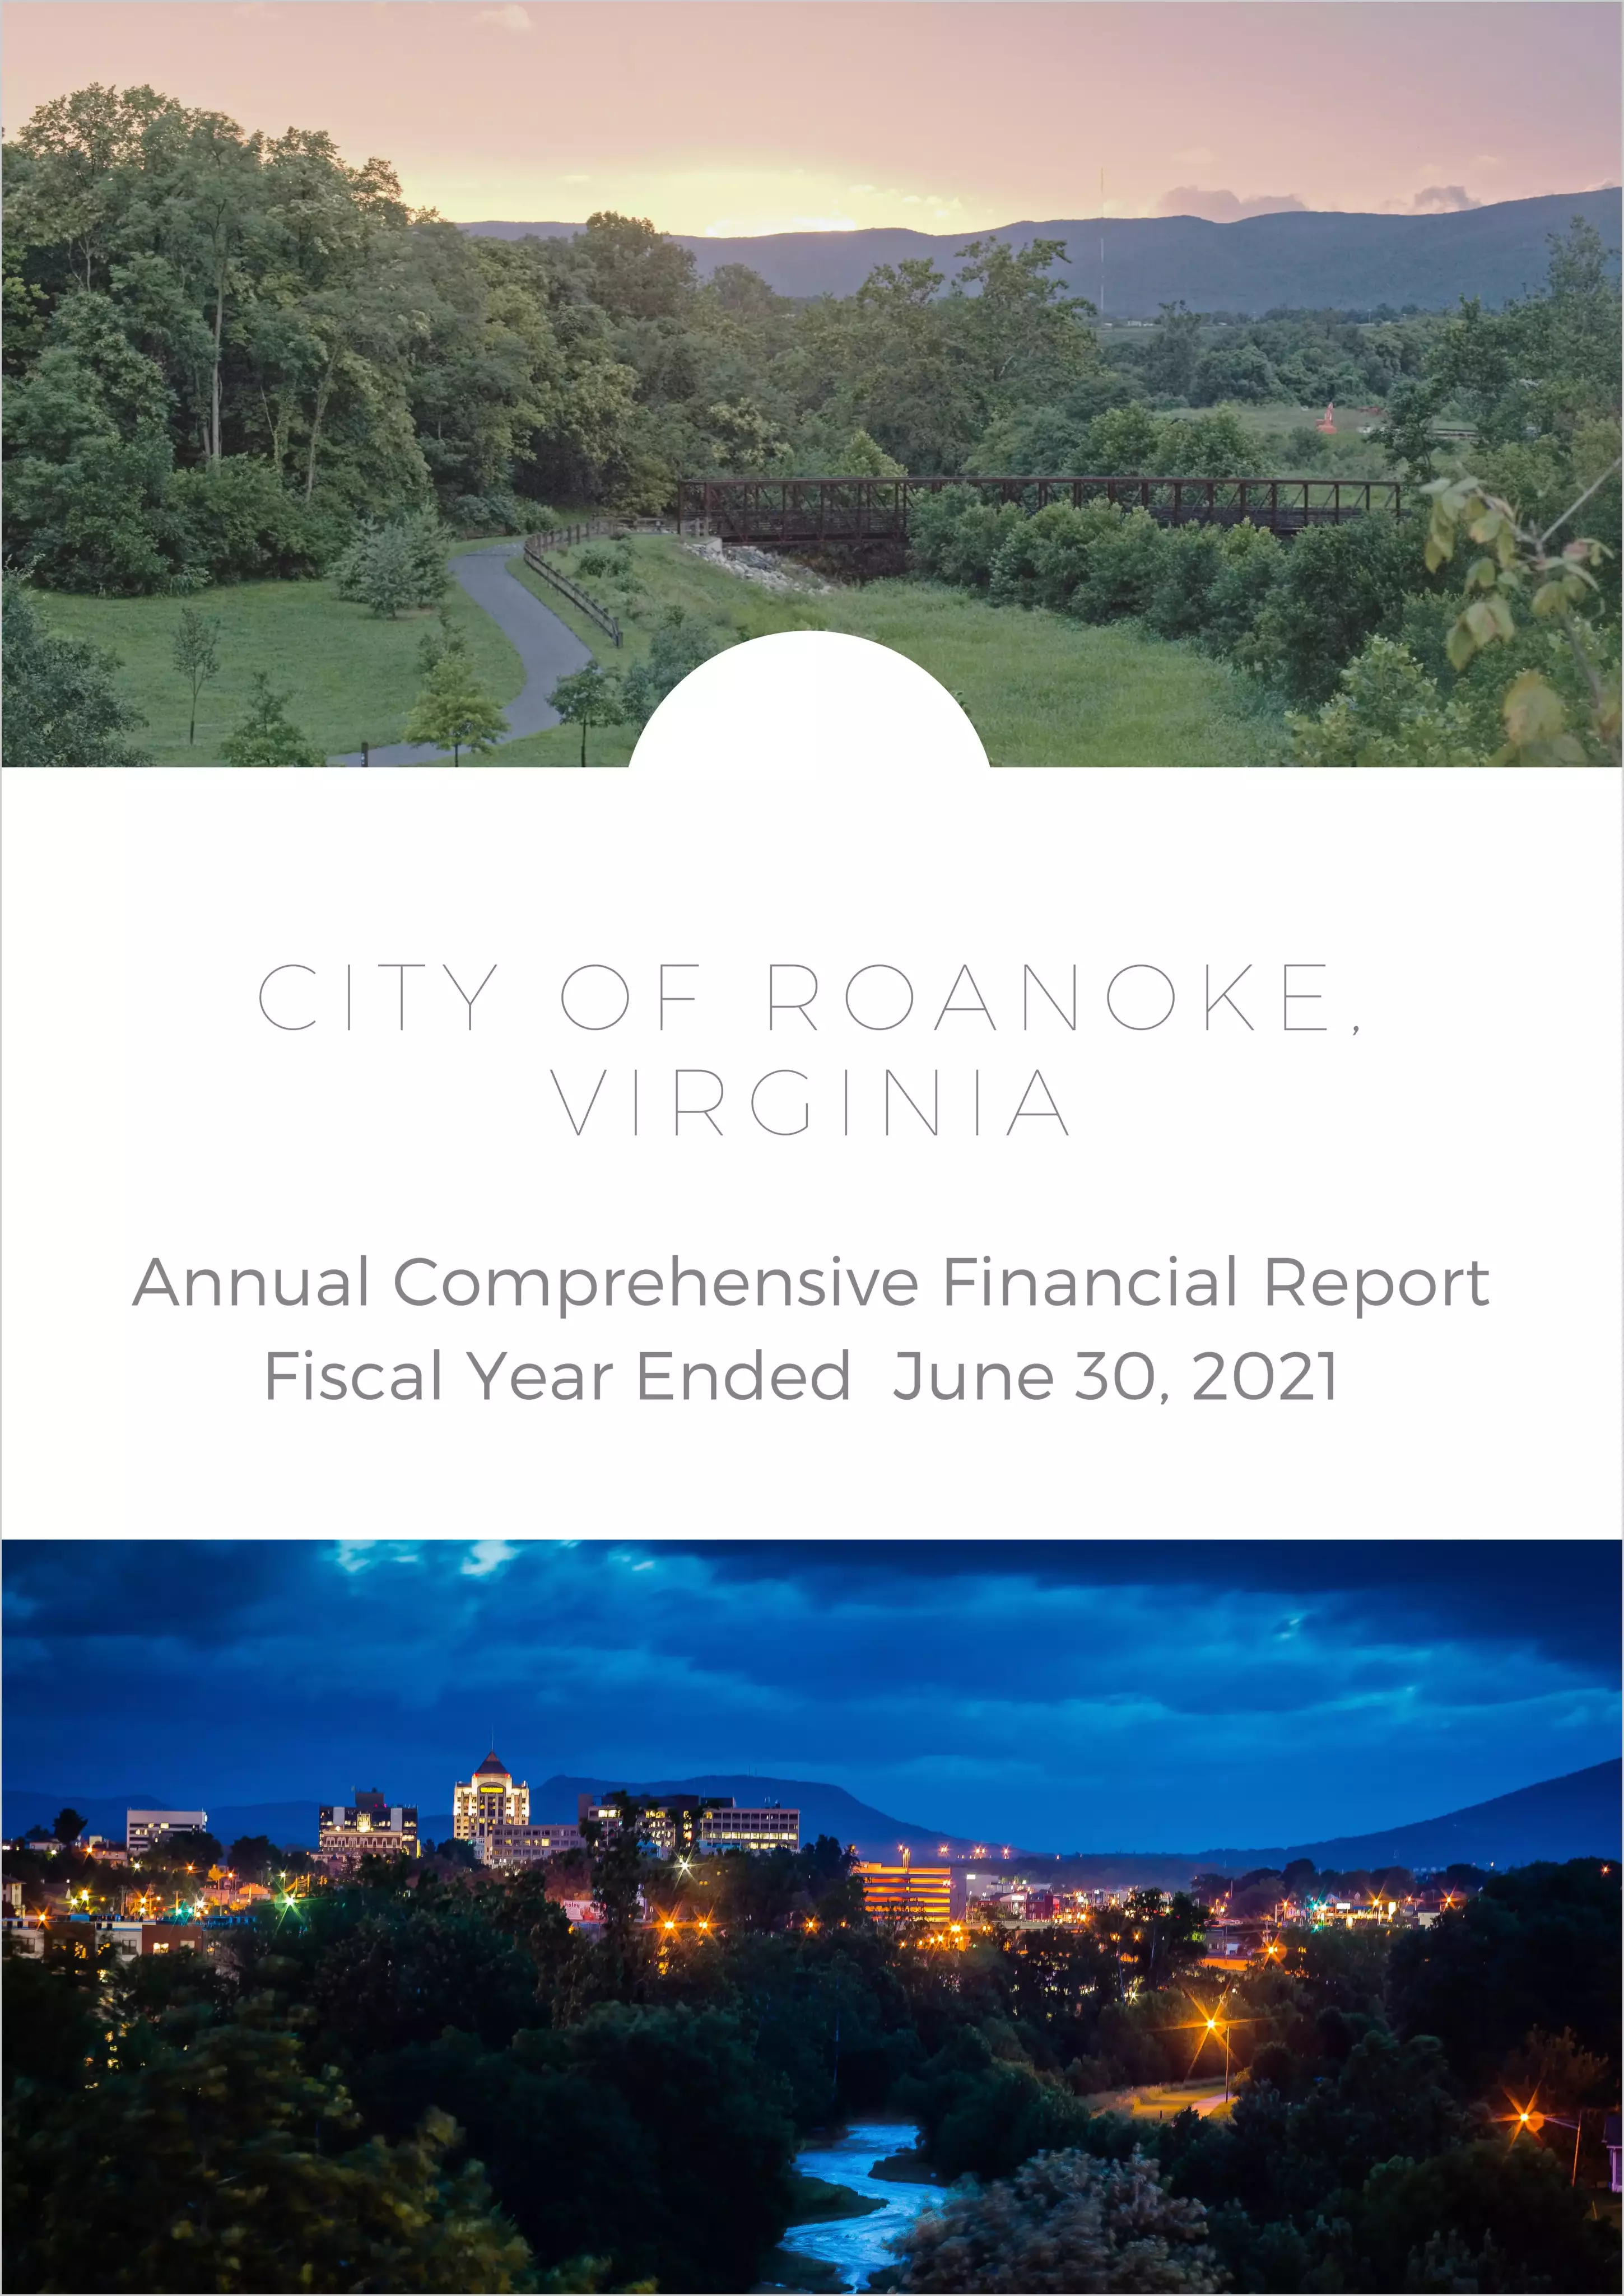 2021 Annual Financial Report for City of Roanoke